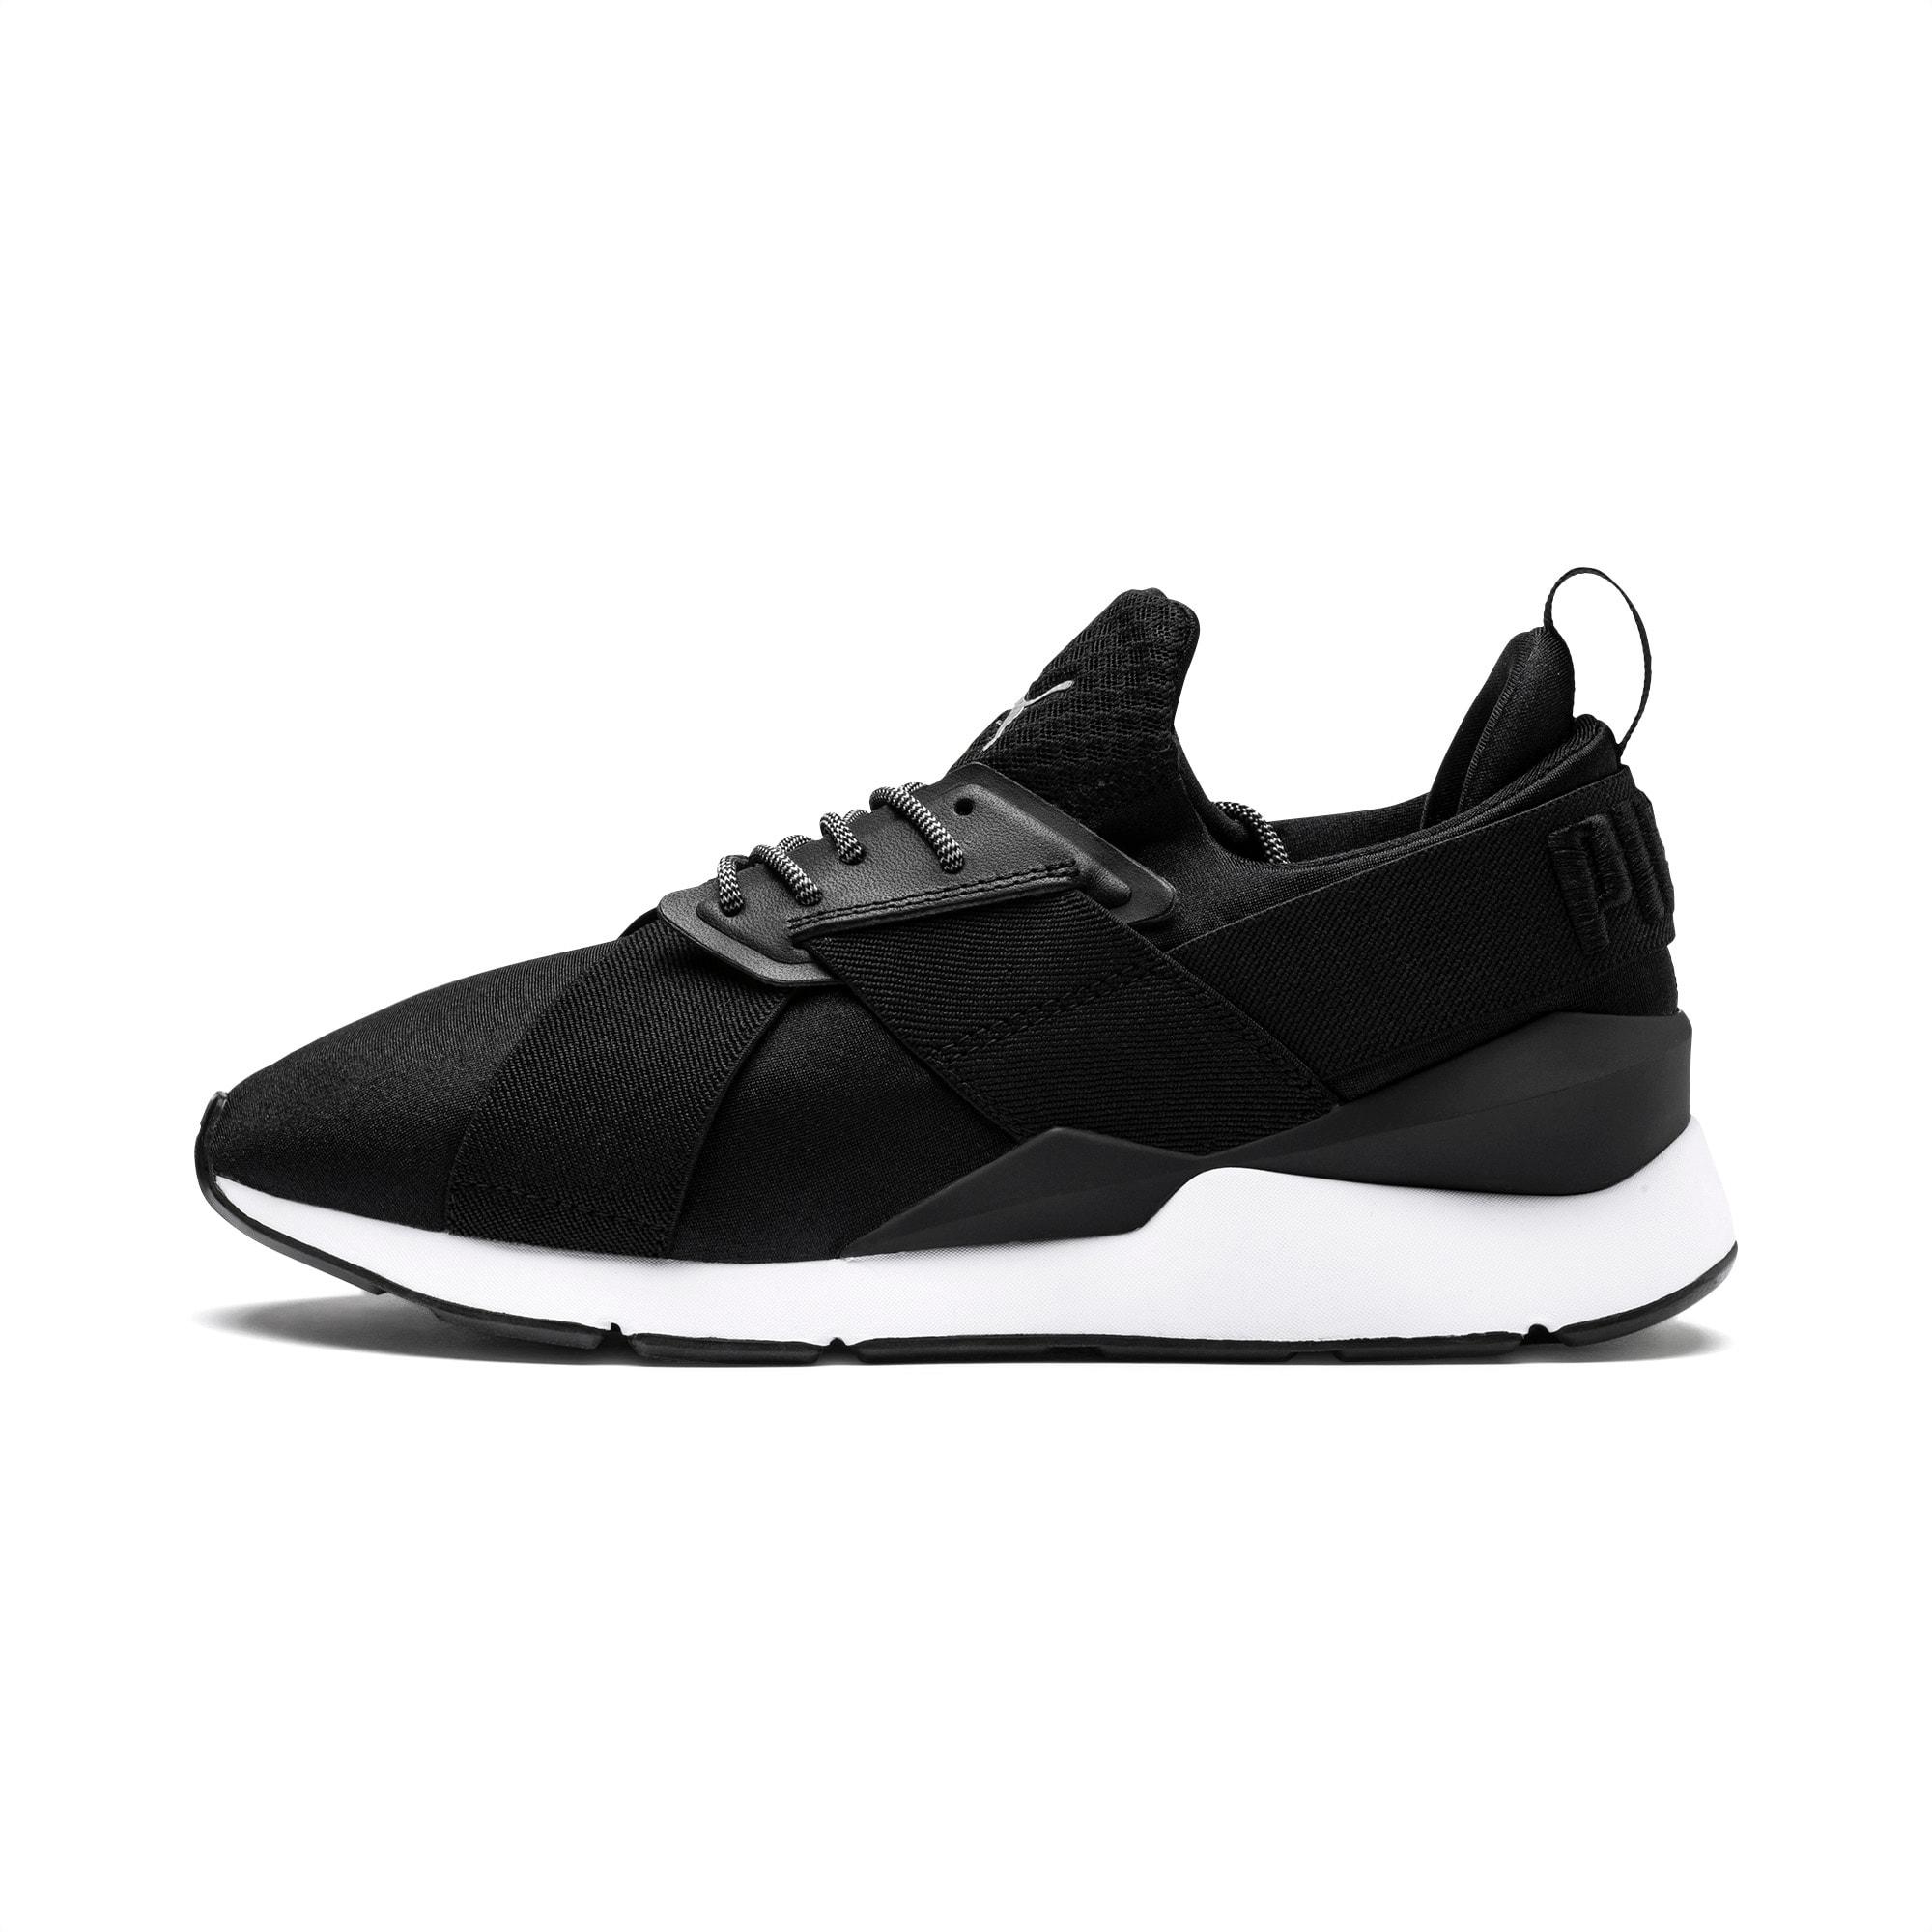 PUMA Muse Satin Ep Wn's Low-top Sneakers in Black/White (Black) | Lyst